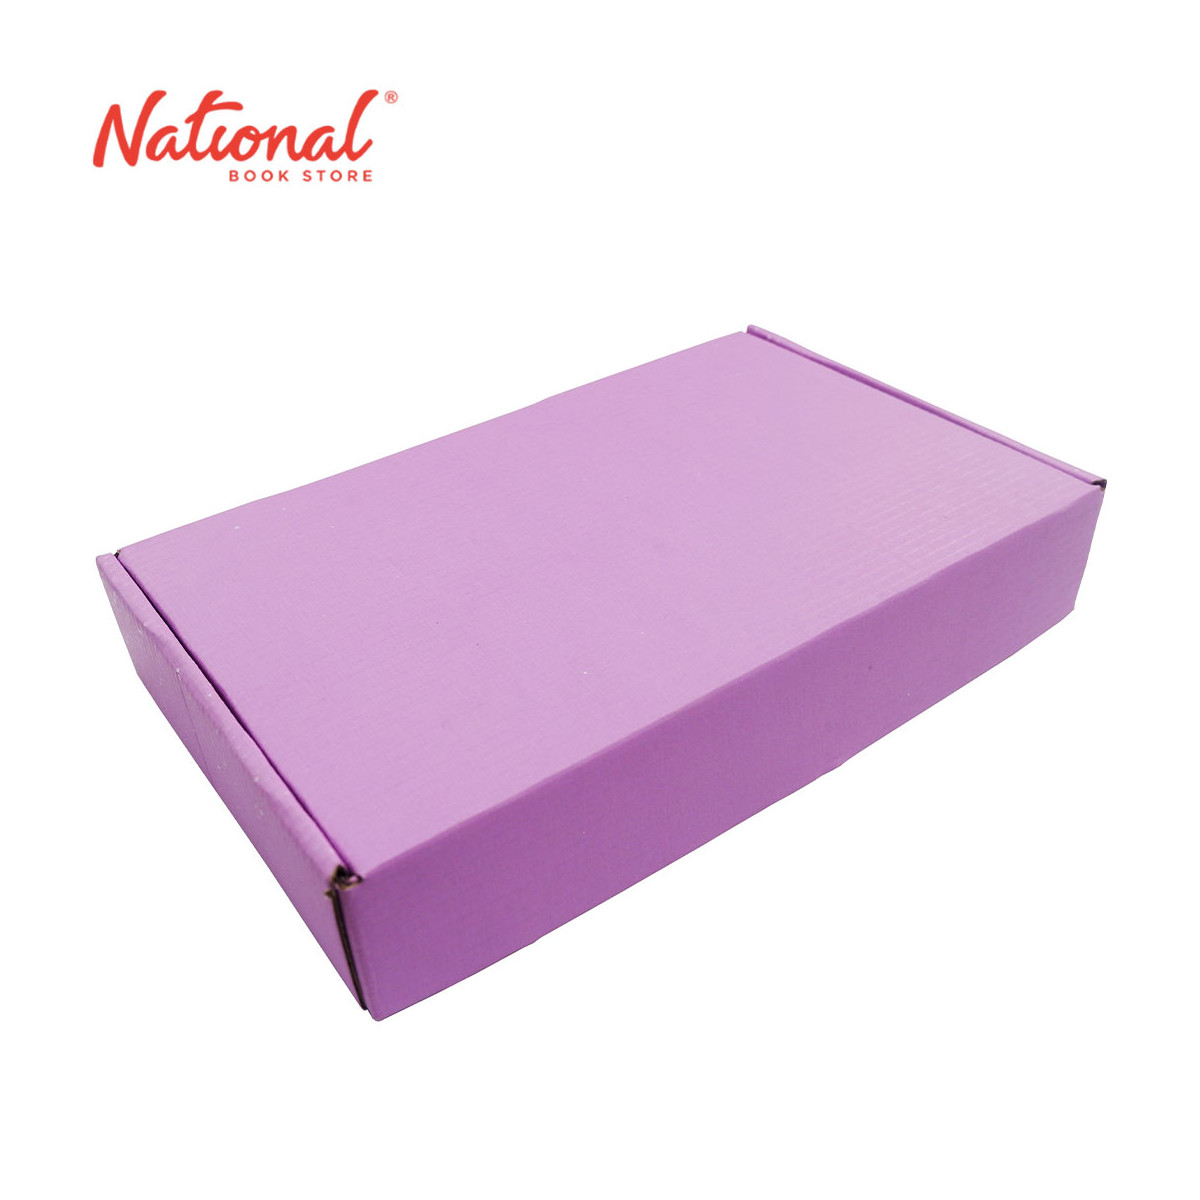 Mailer Box 265x160x47mm Lavender Collapsed - Packaging Supplies